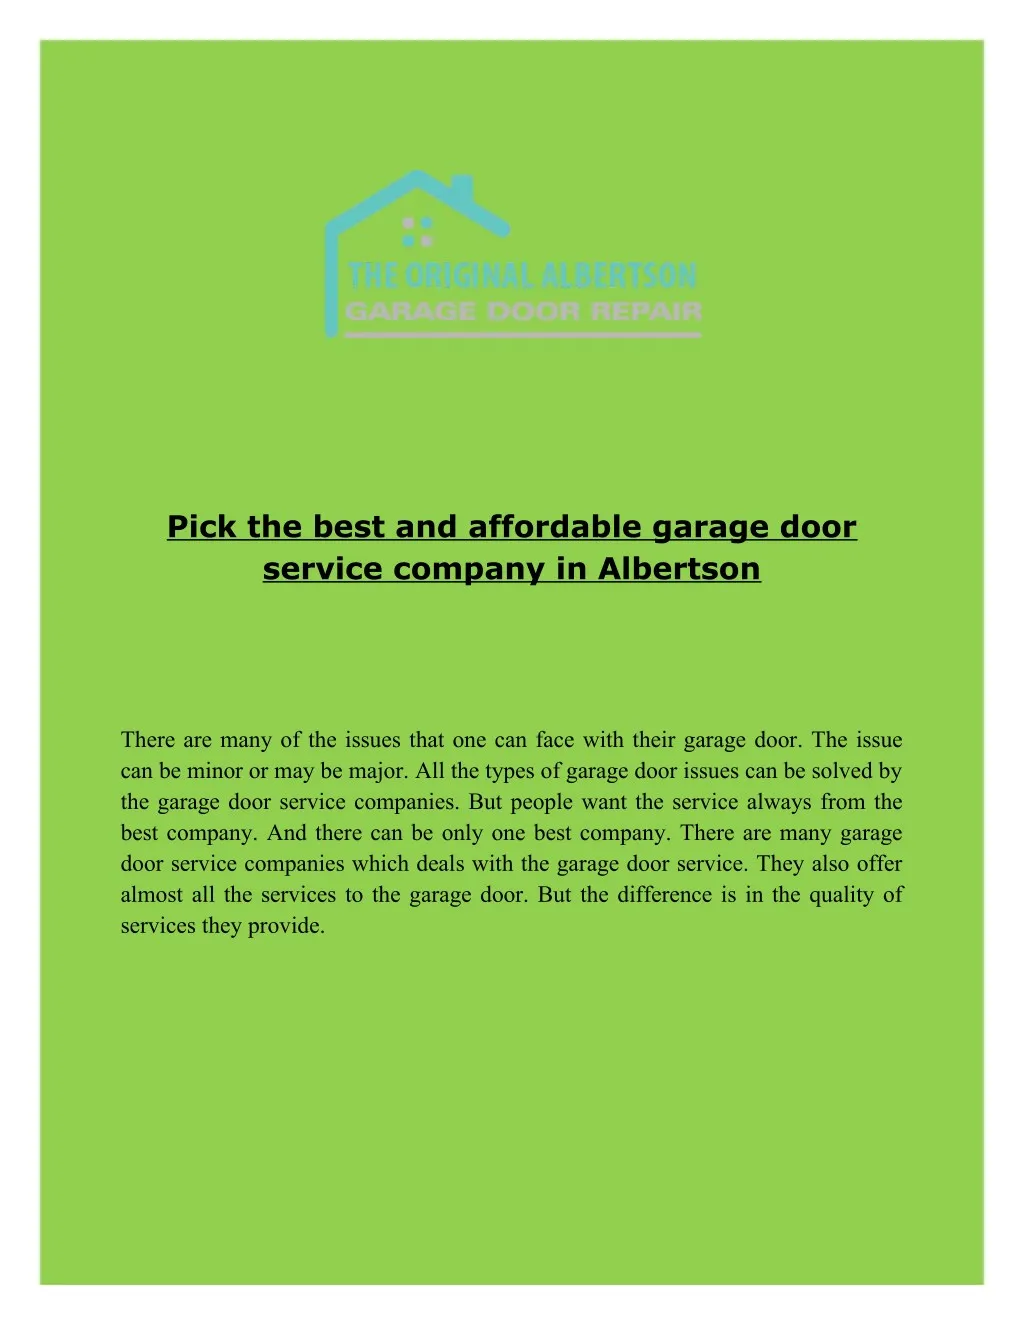 pick the best and affordable garage door service